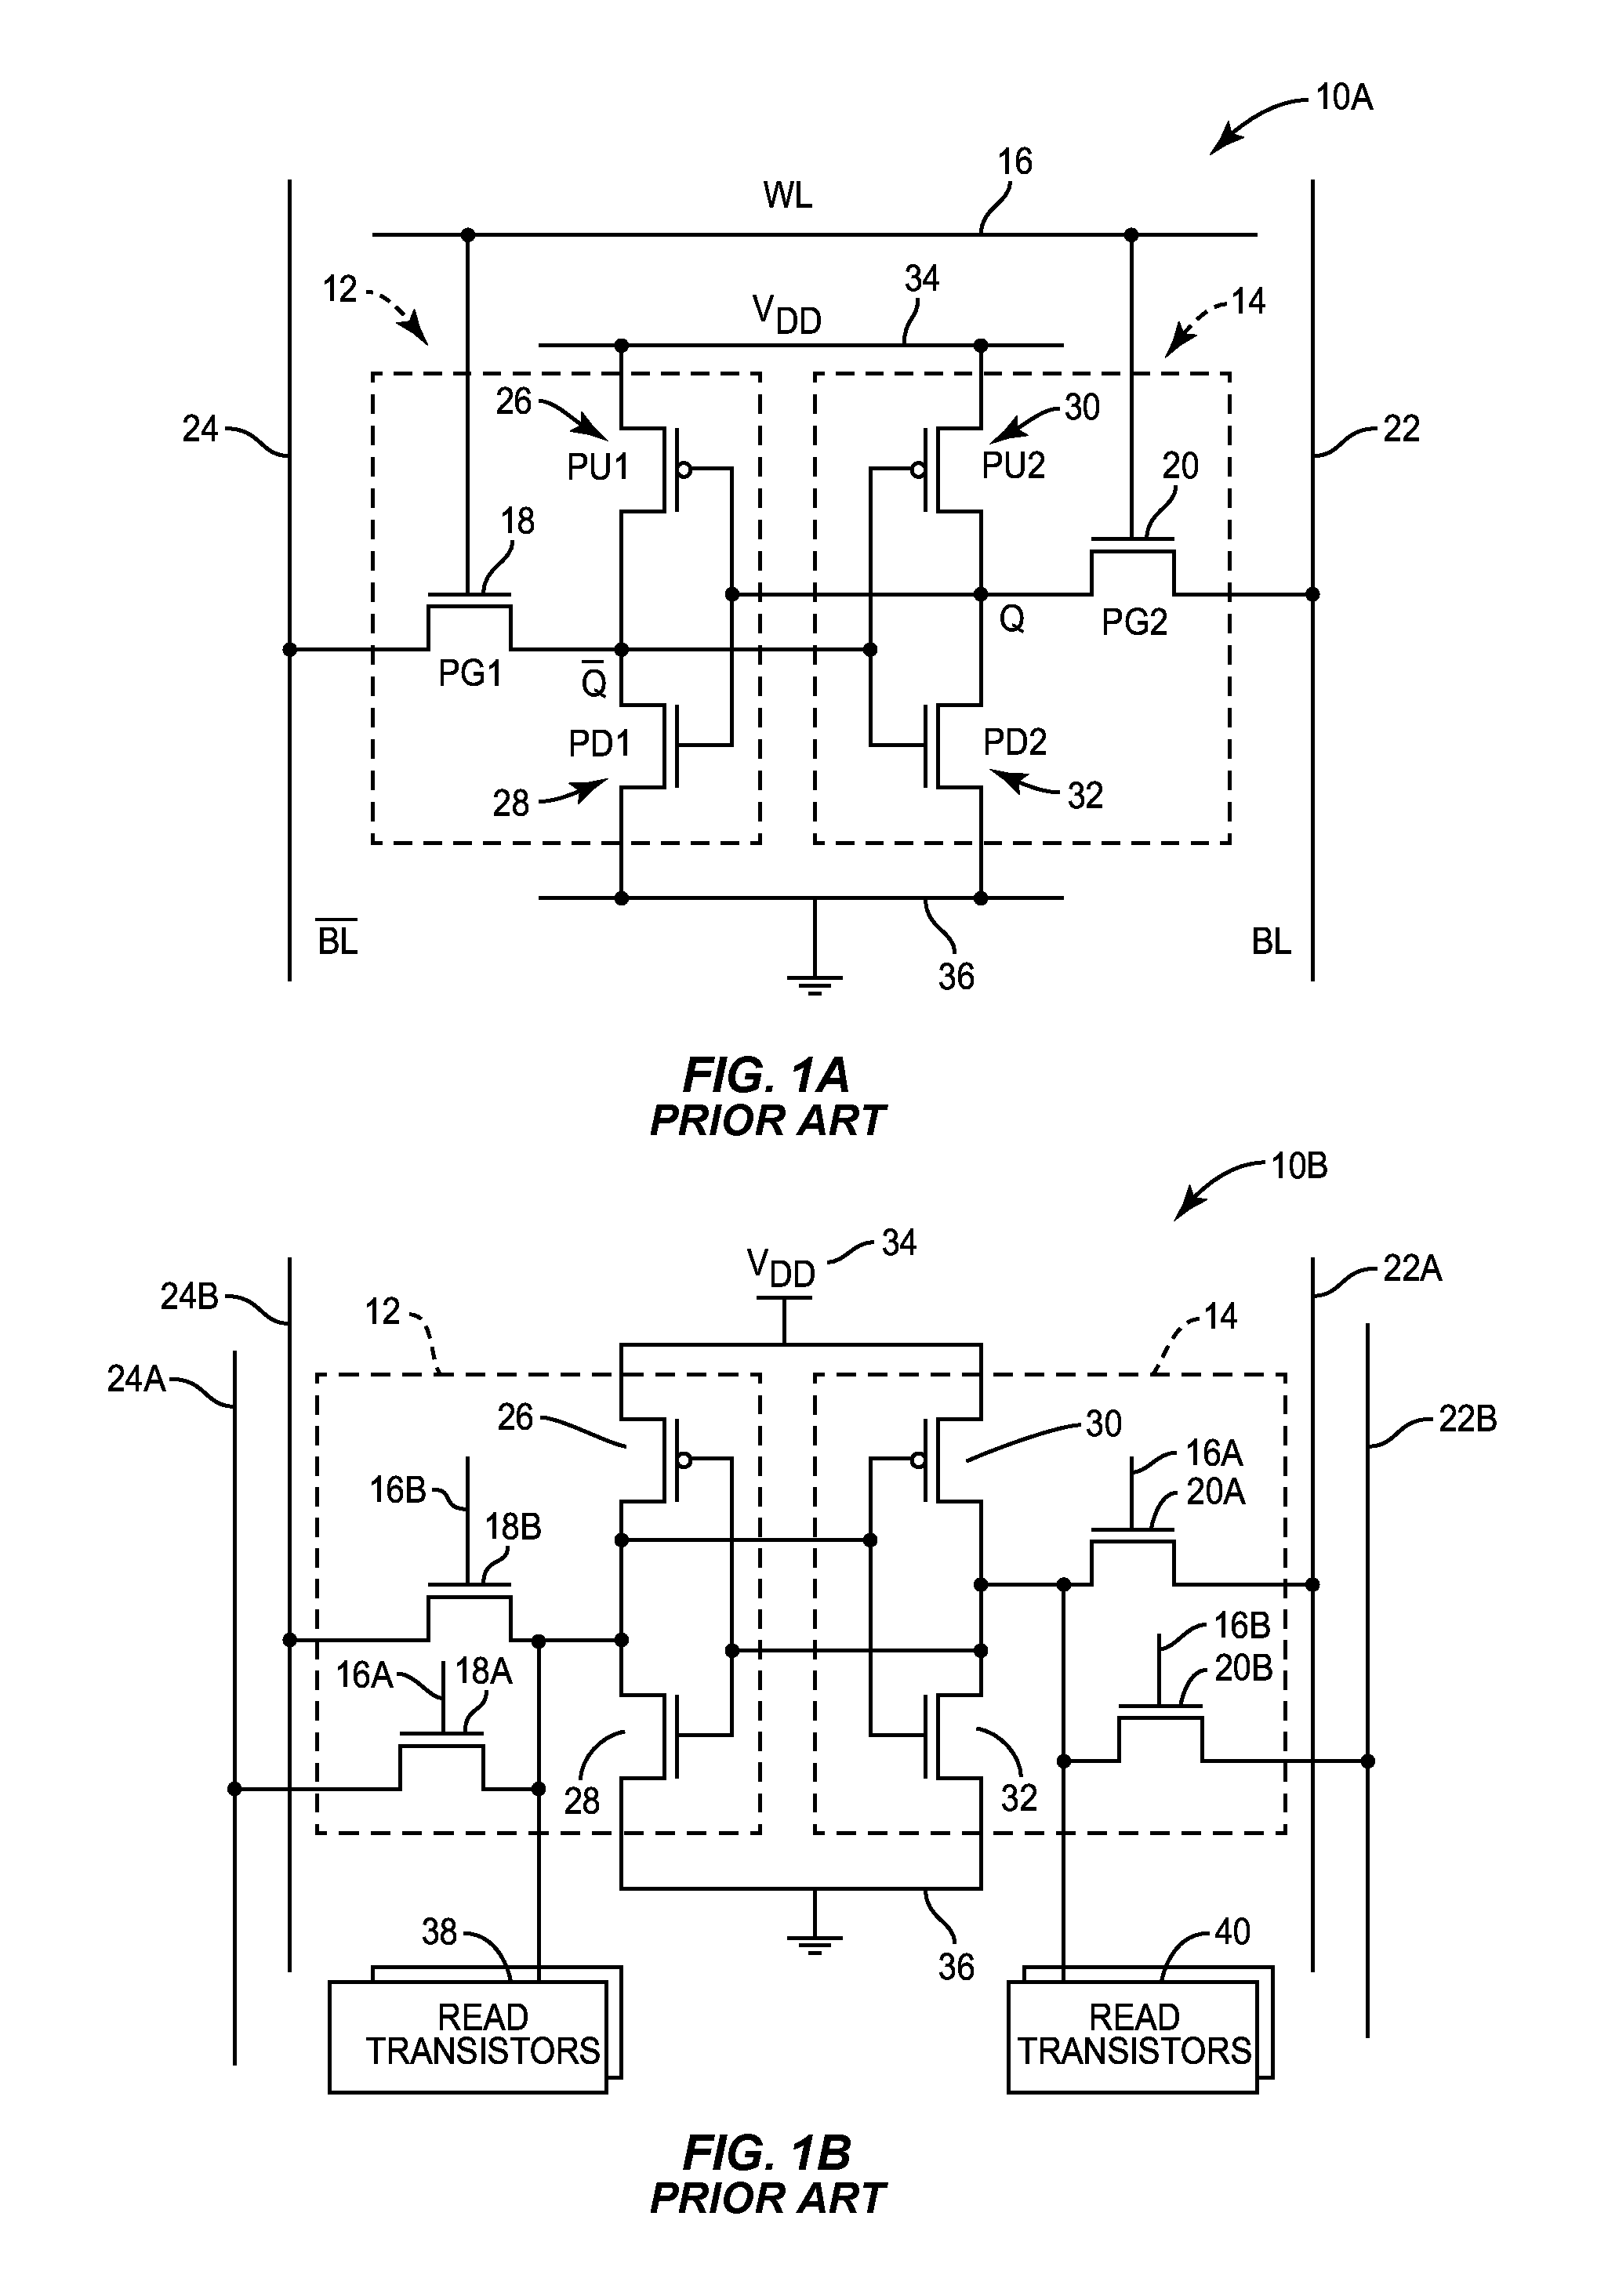 THREE-DIMENSIONAL (3D) MEMORY CELL SEPARATION AMONG 3D INTEGRATED CIRCUIT (IC) TIERS, AND RELATED 3D INTEGRATED CIRCUITS (3DICs), 3DIC PROCESSOR CORES, AND METHODS